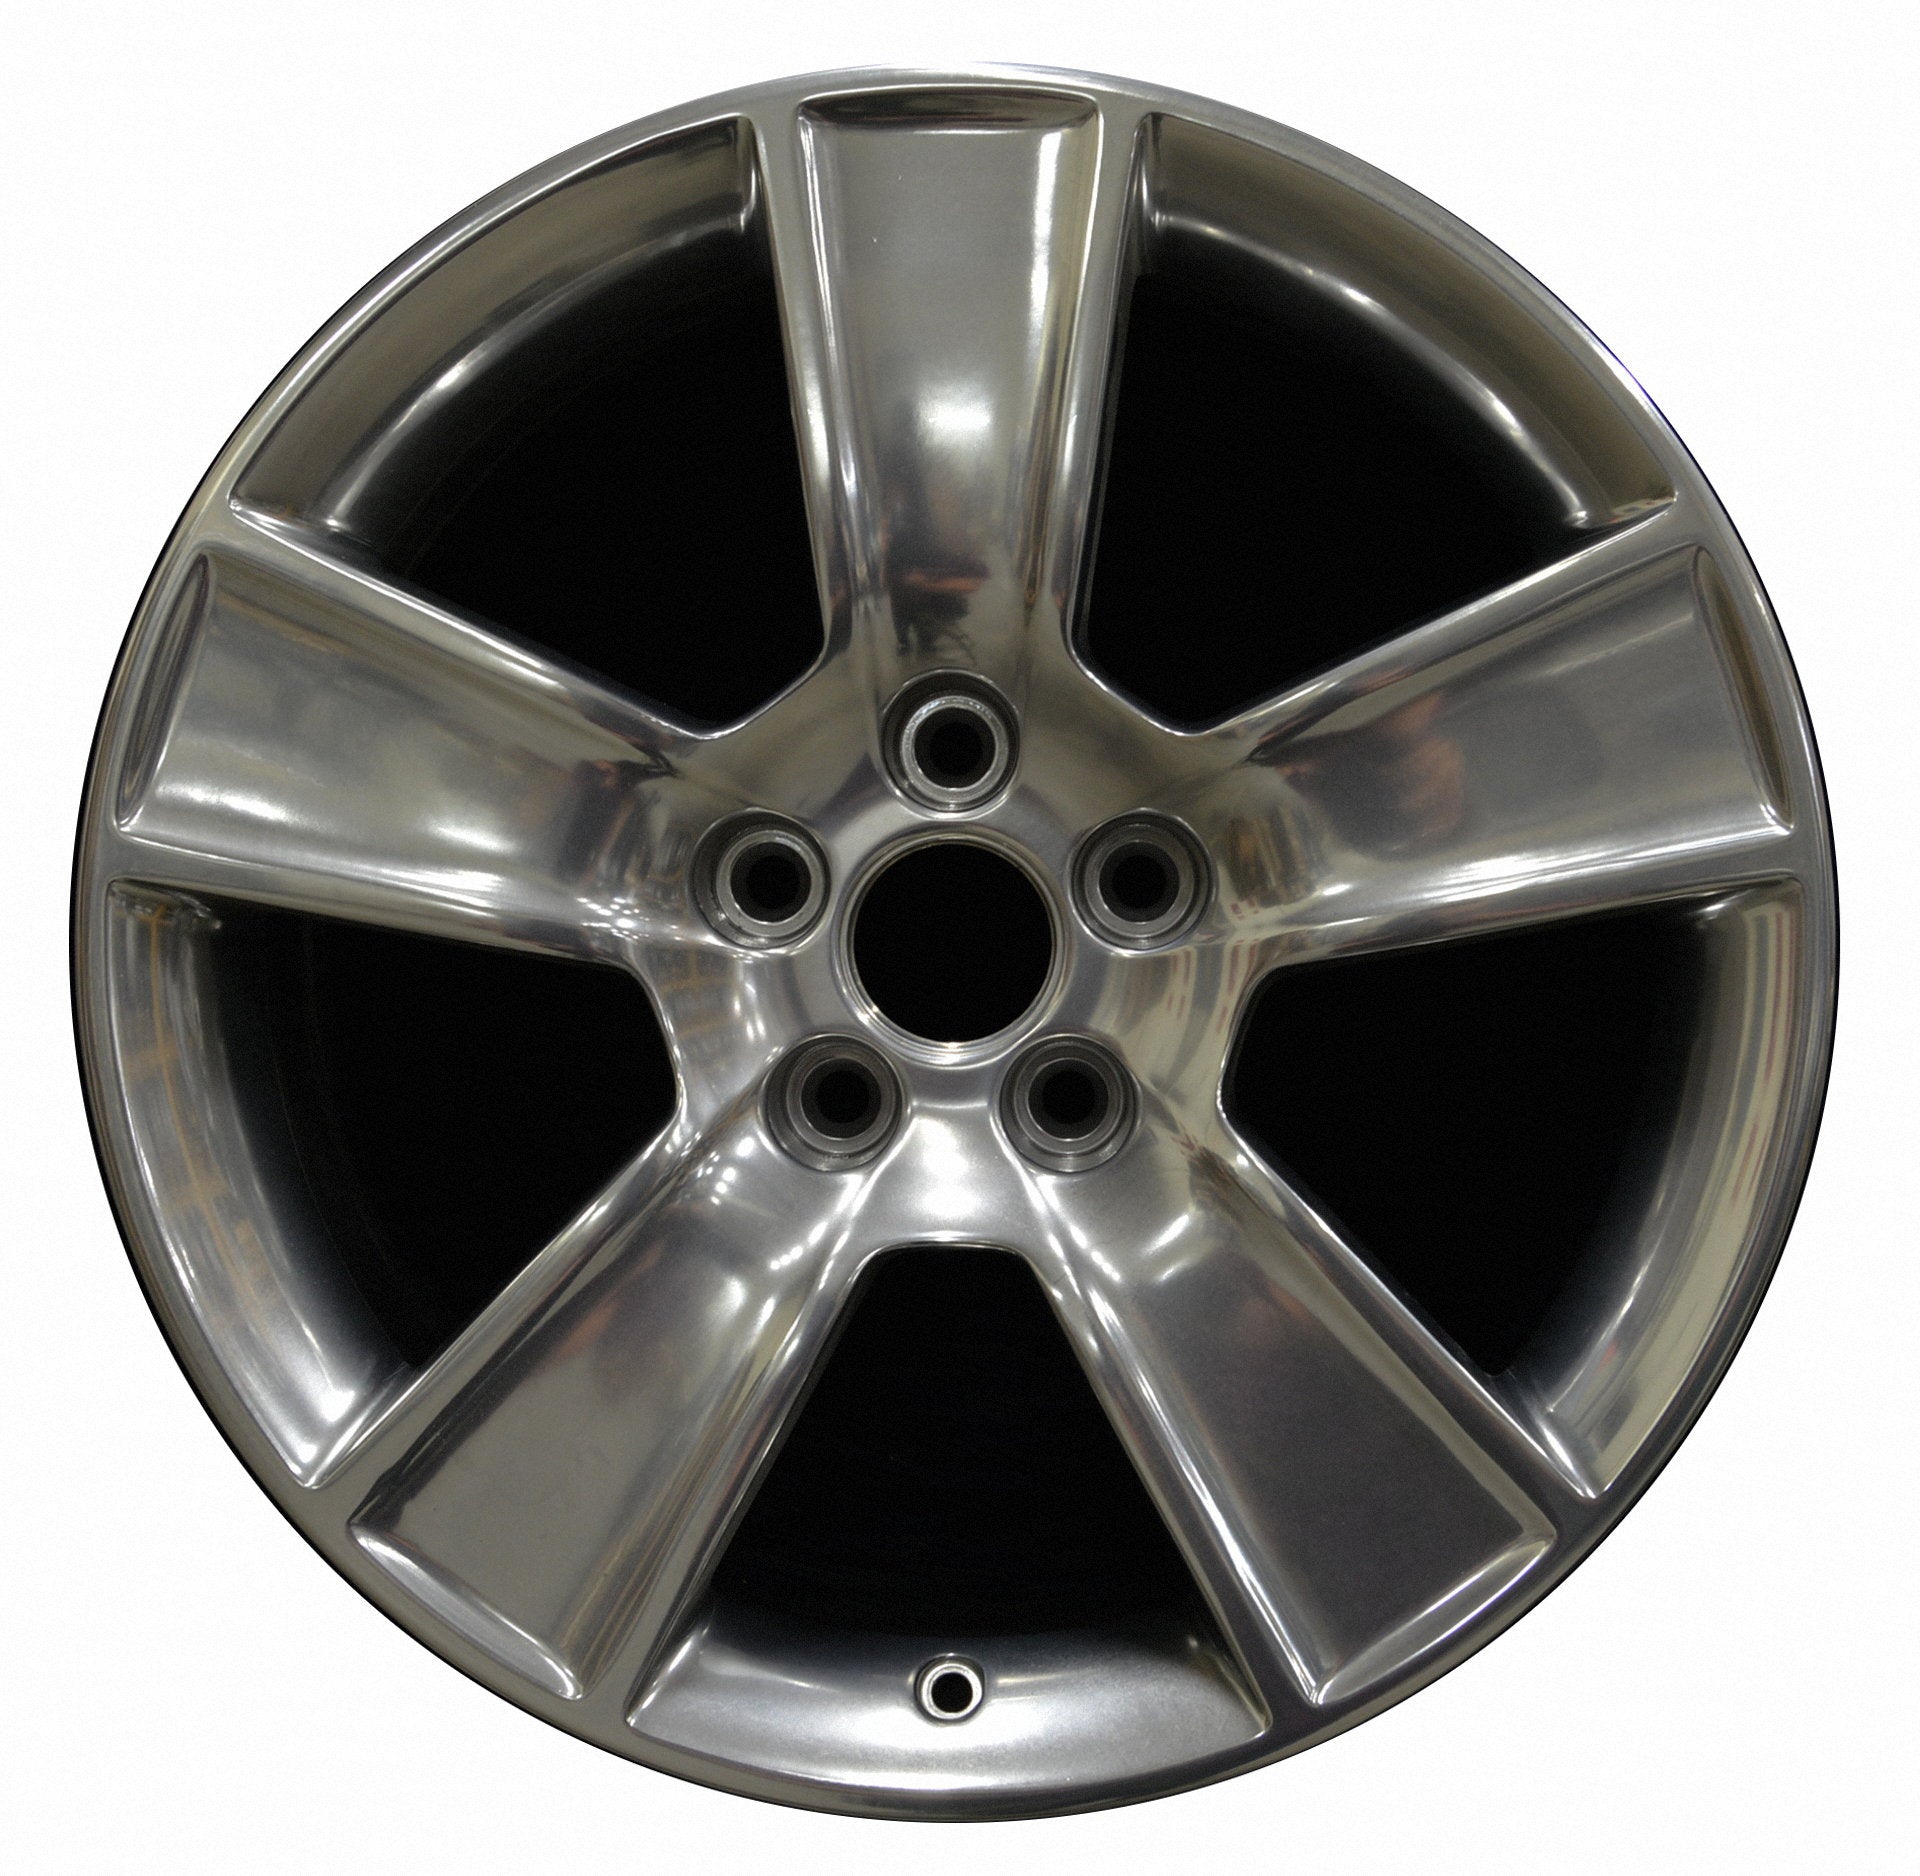 Ford Mustang  2006, 2007, 2008, 2009 Factory OEM Car Wheel Size 18x8.5 Alloy WAO.3647.FULL.POL